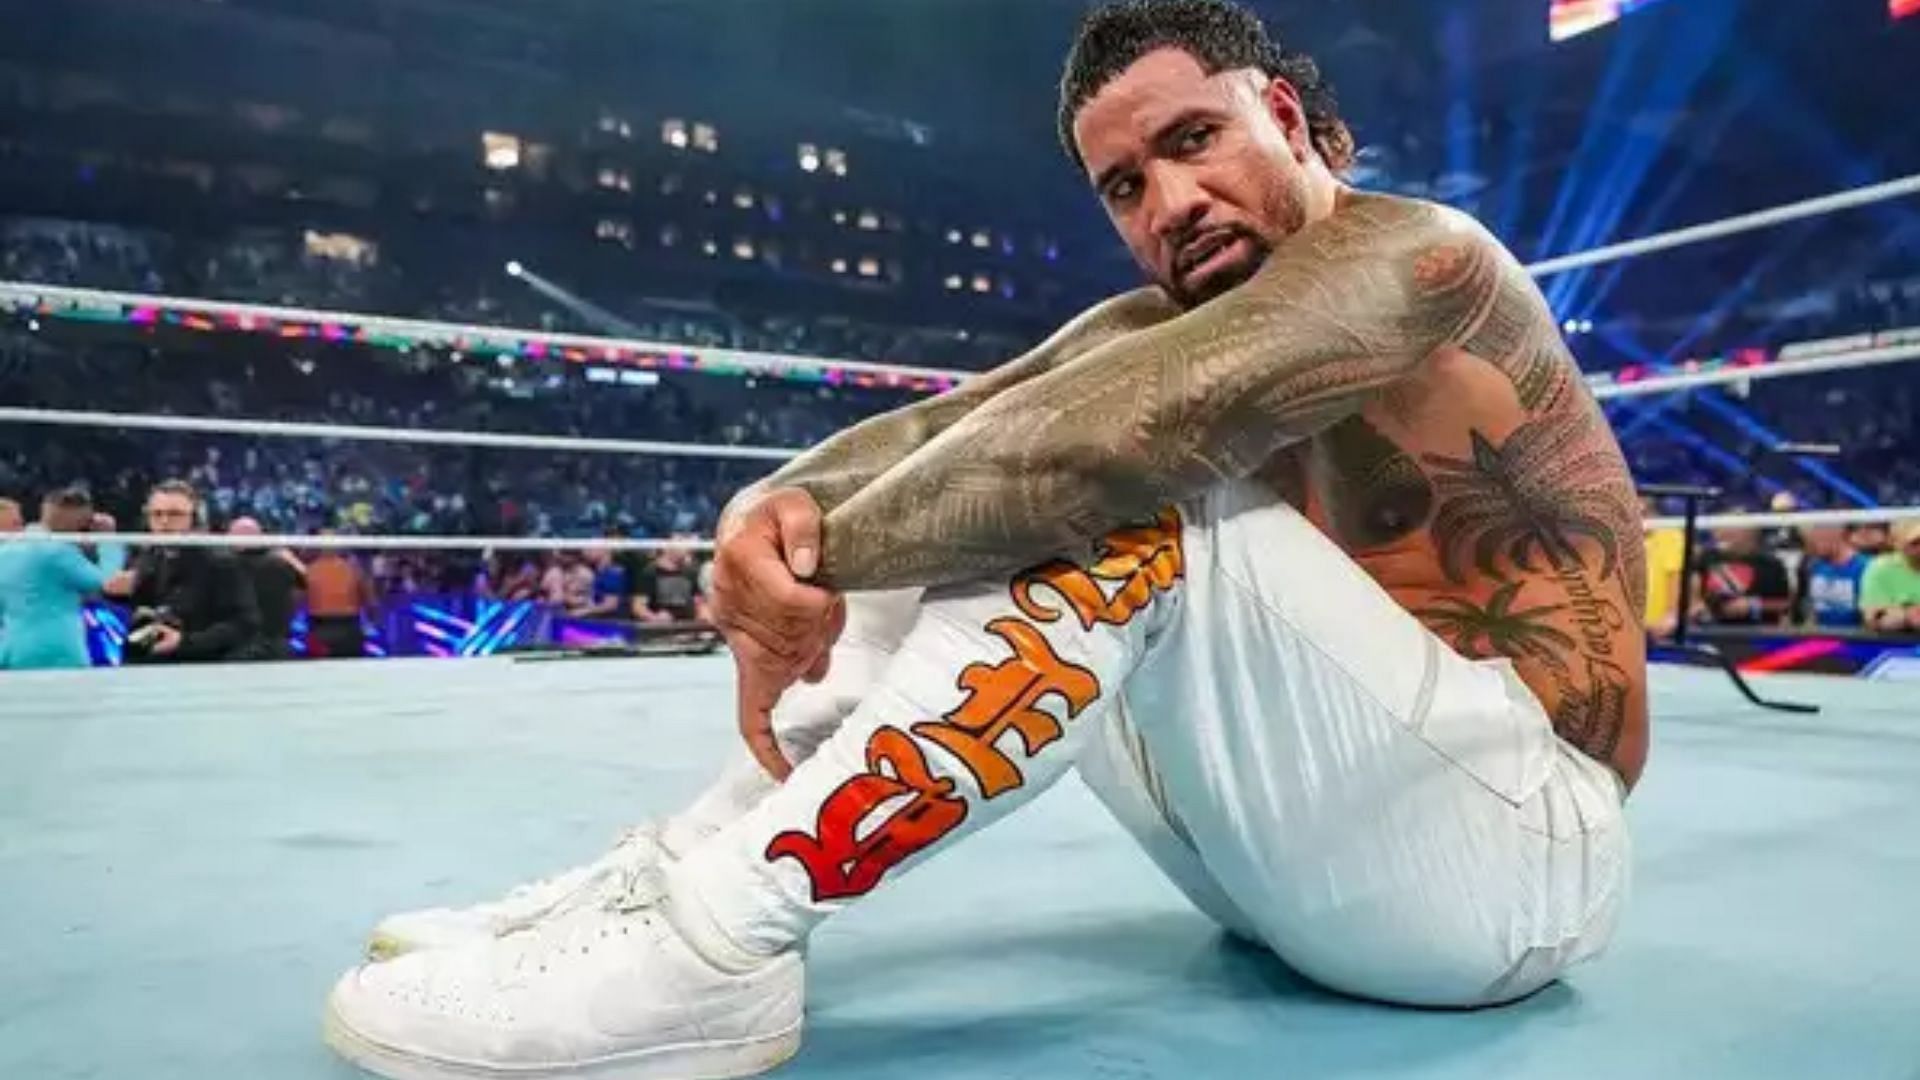 Jey Uso has been at the center of controversy this week